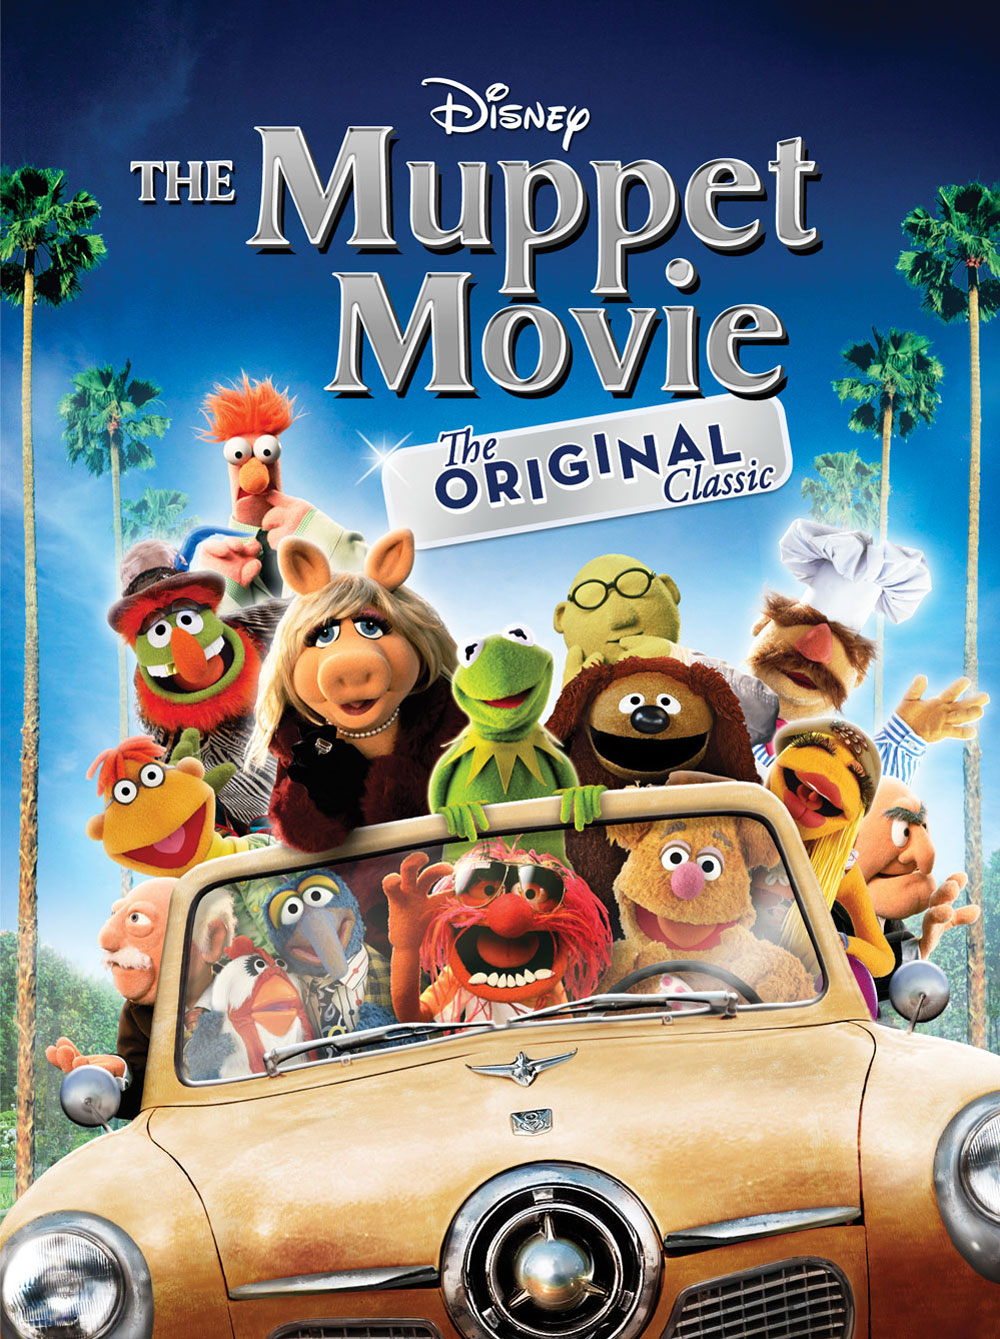 The-Muppet-Movie-Blu-ray-cover.jpg